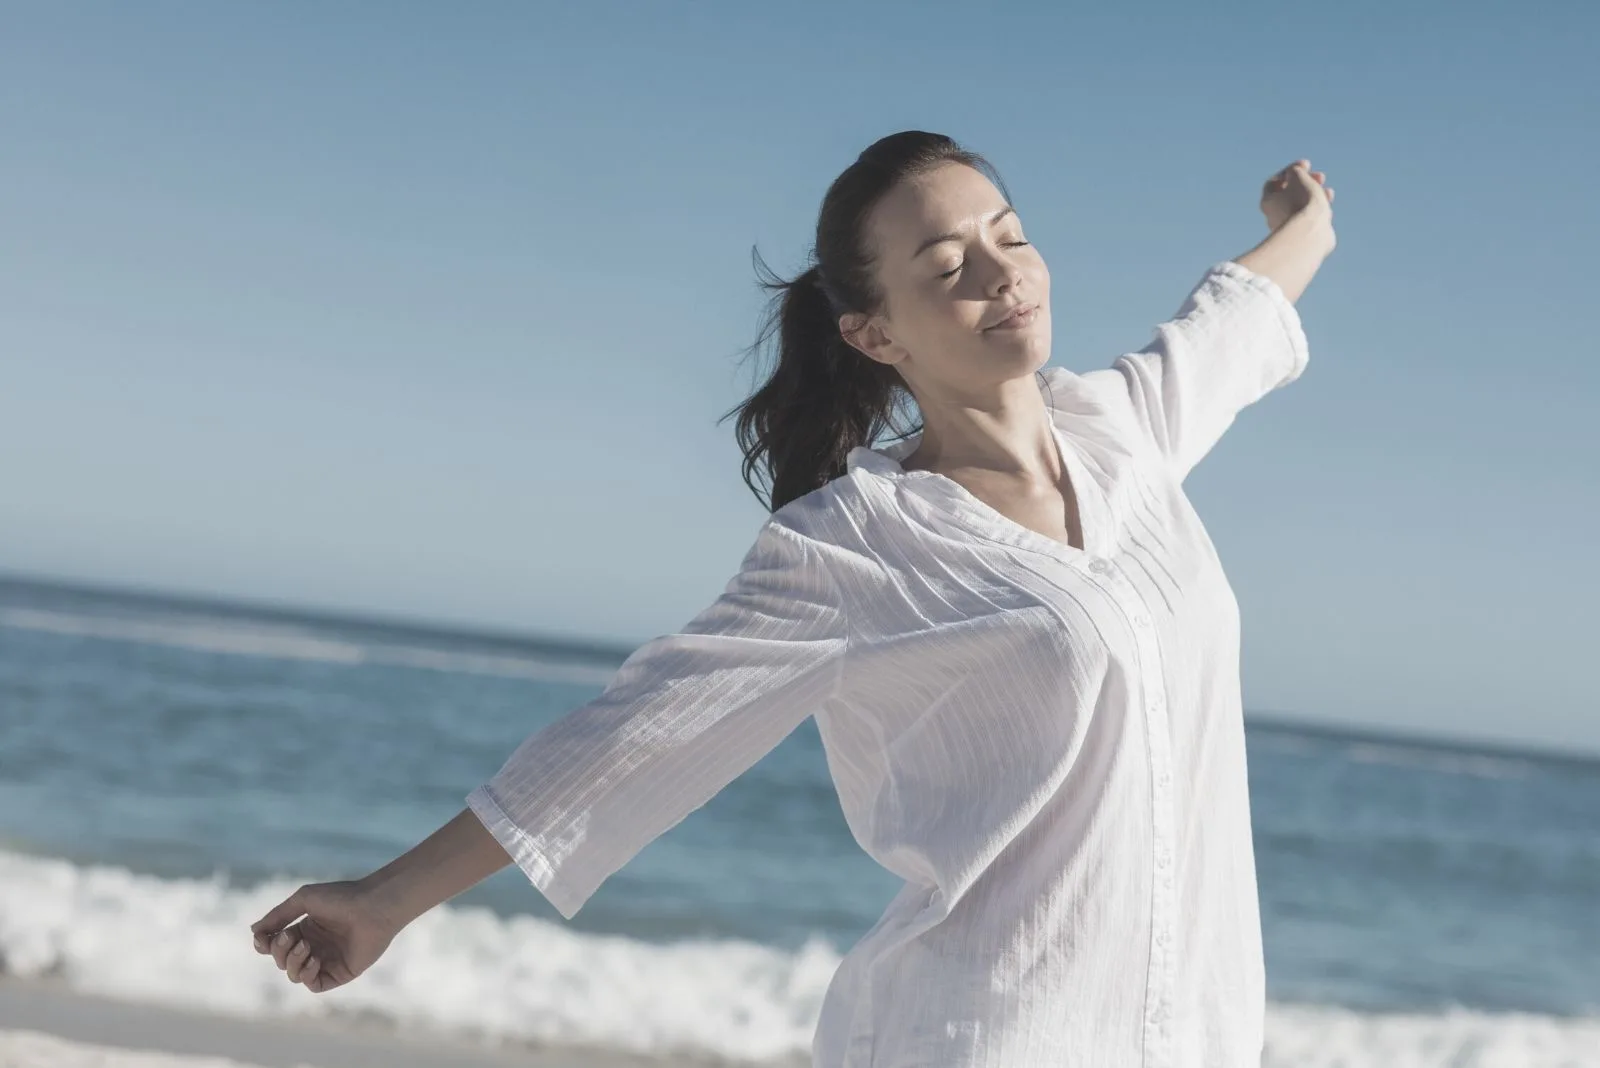 calm woman stretching in beach wearing white long sleeves and closing her eyes